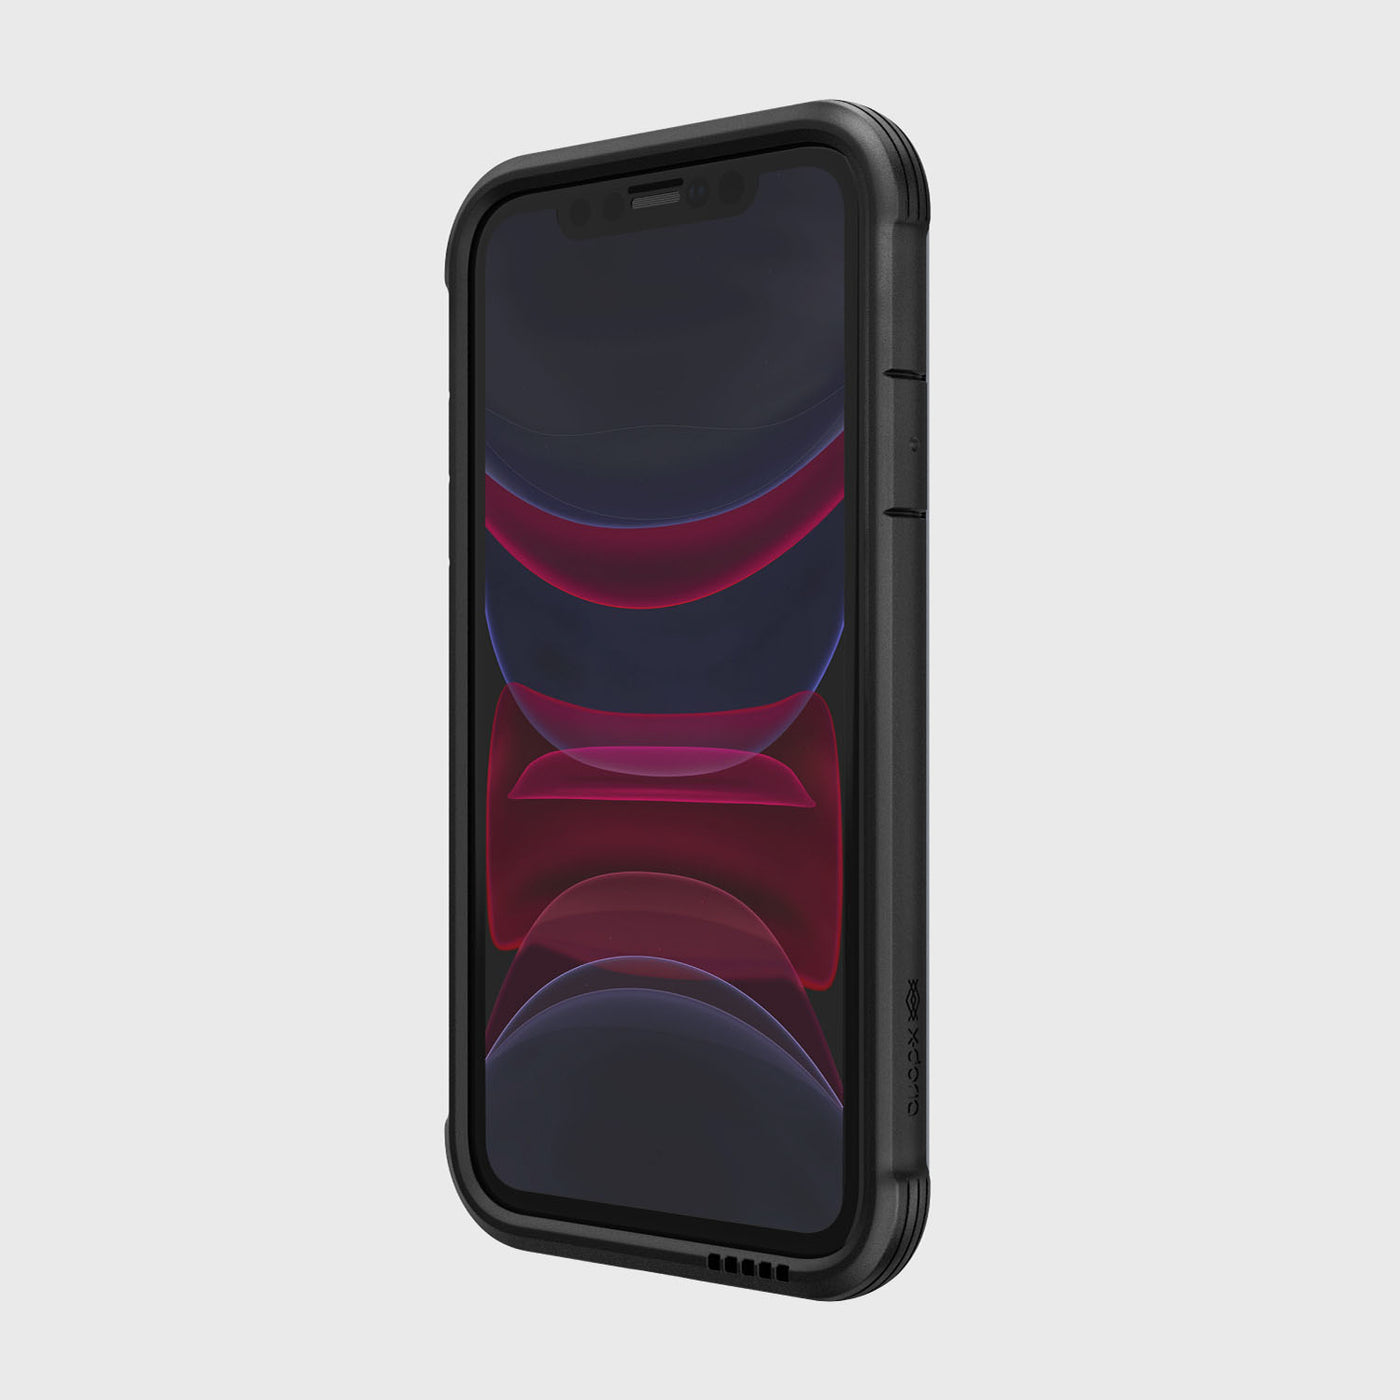 Luxurious Case for iPhone 11. Raptic Lux in black leather.